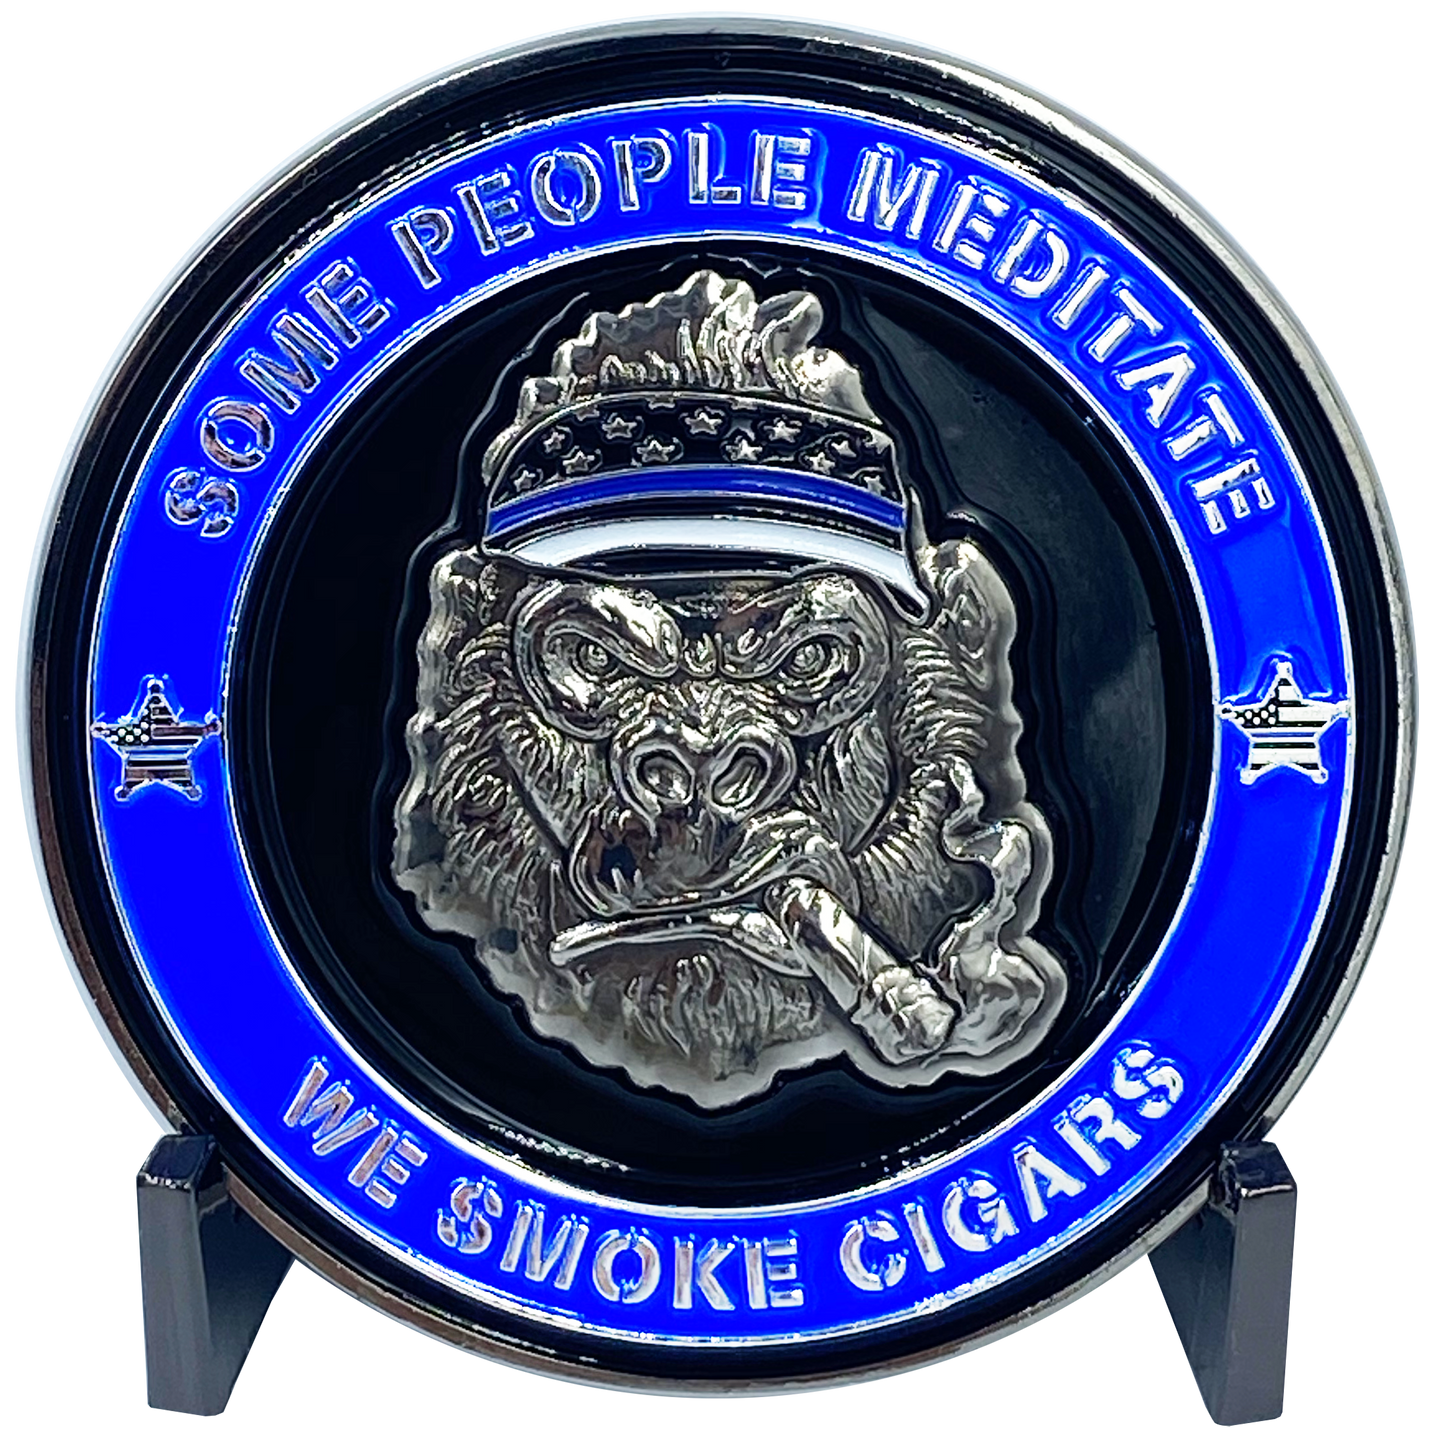 DL8-03 MTV Cribs Michael Strahan episode Tap Dat Ash Cigar Coin Challenge Coin SOME PEOPLE MEDITATE WE SMOKE CIGARS blue